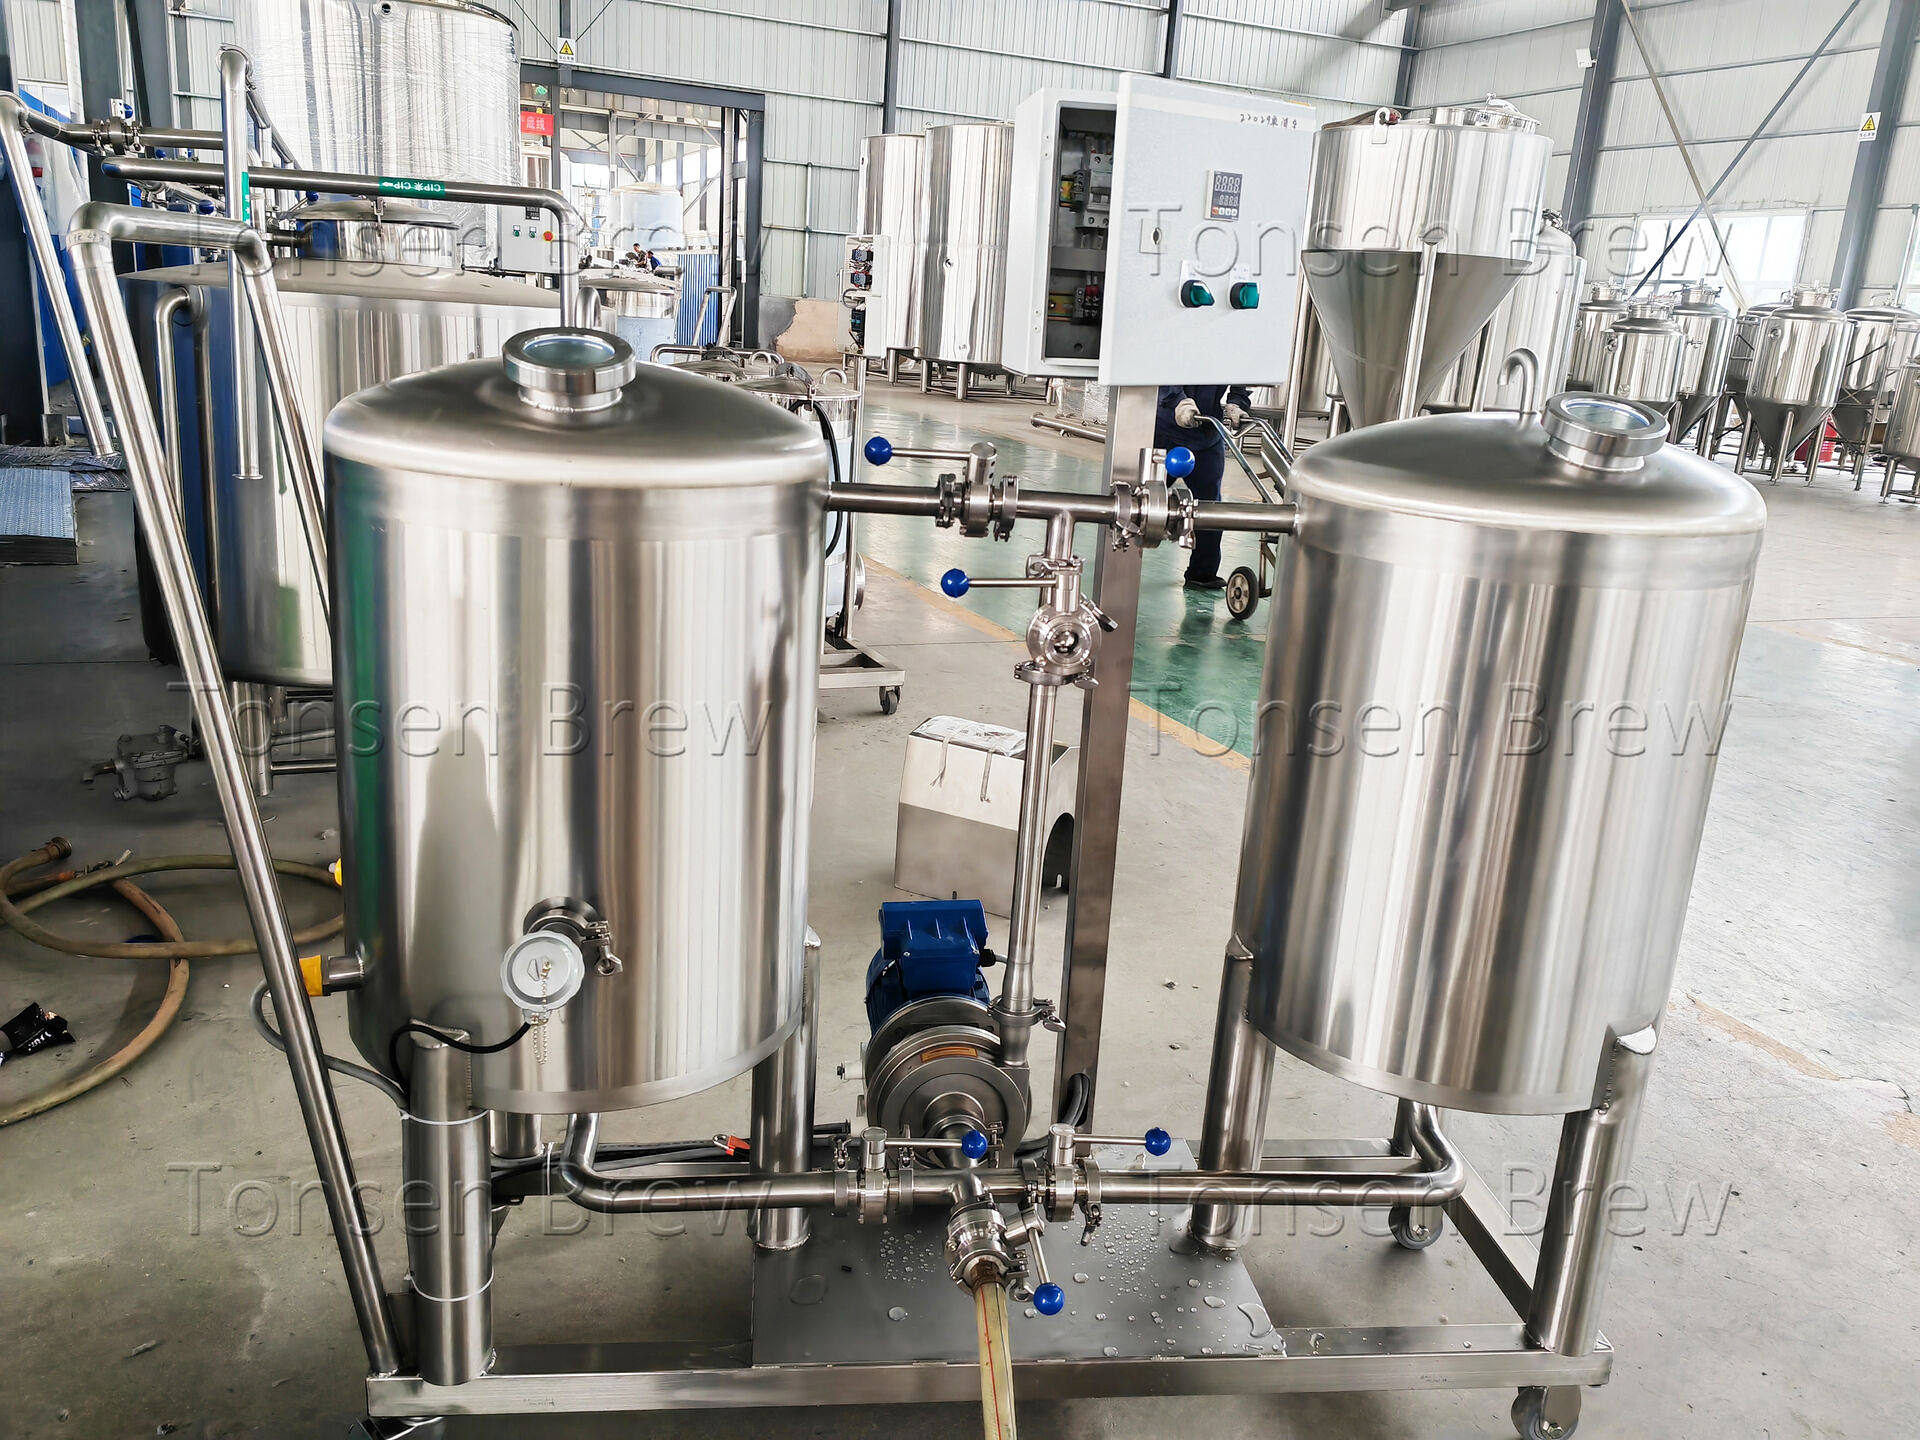 Soda water brewing system